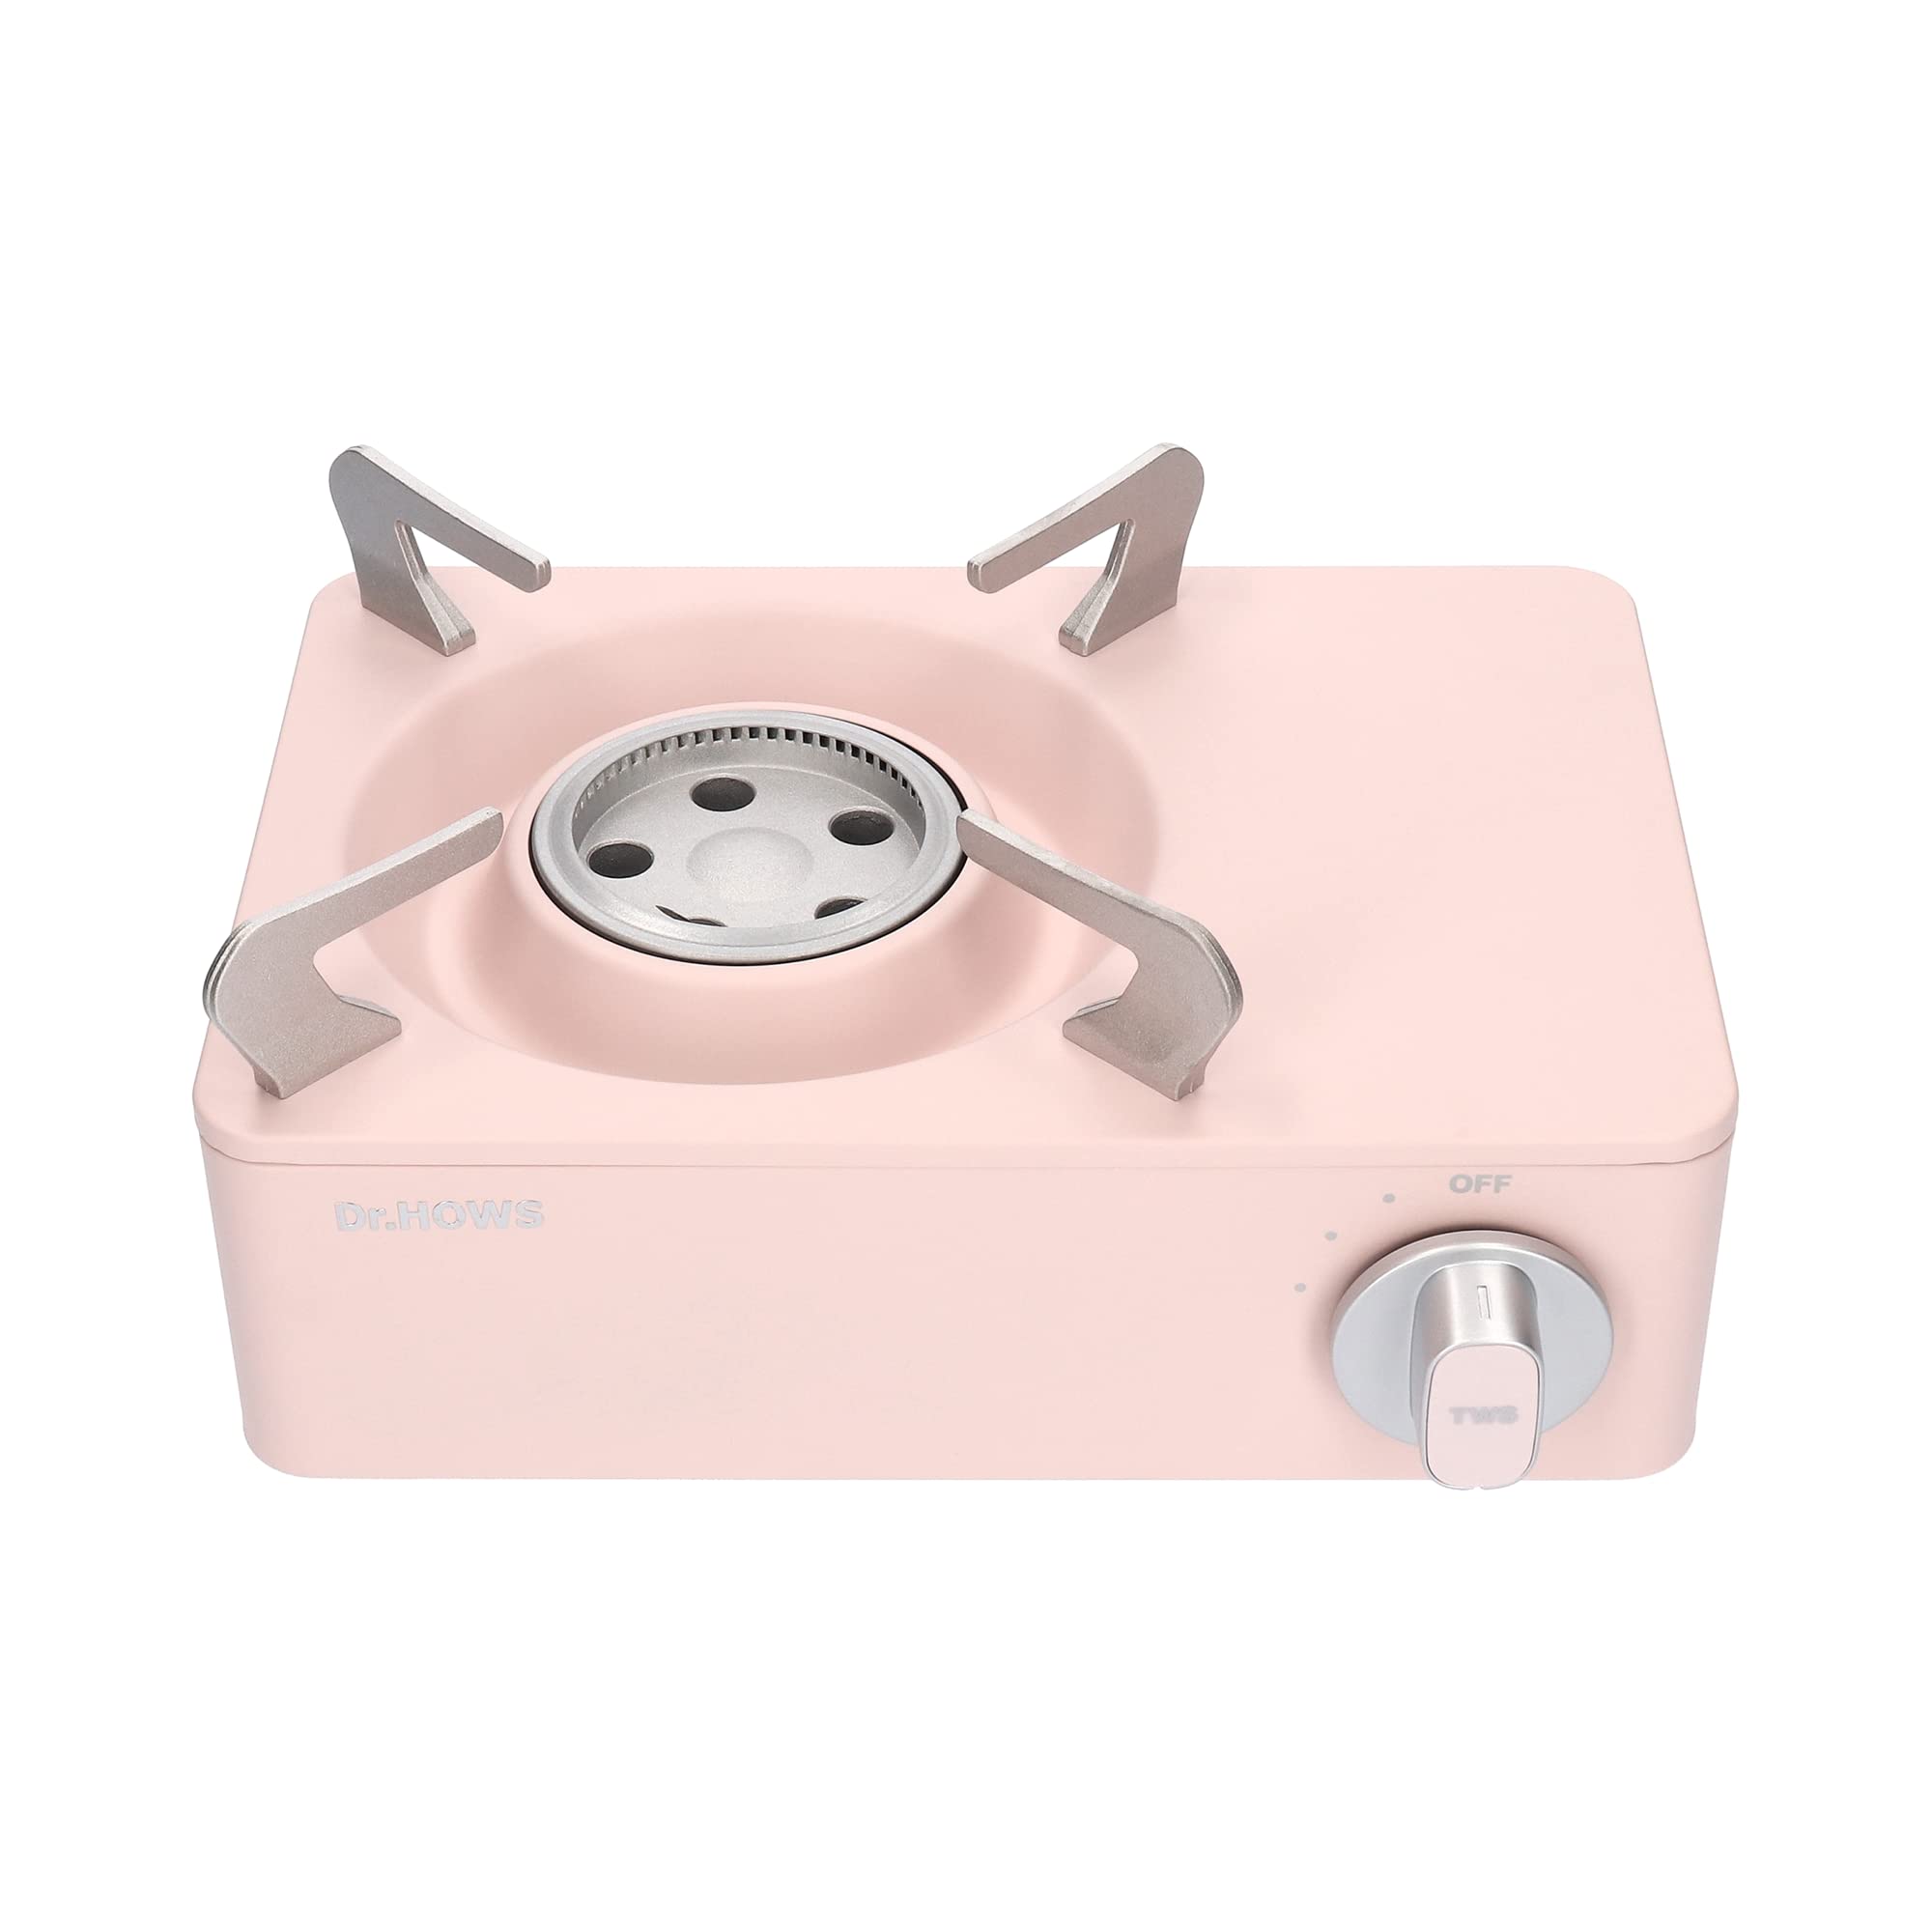 Dr How Twinkle Mini Stove